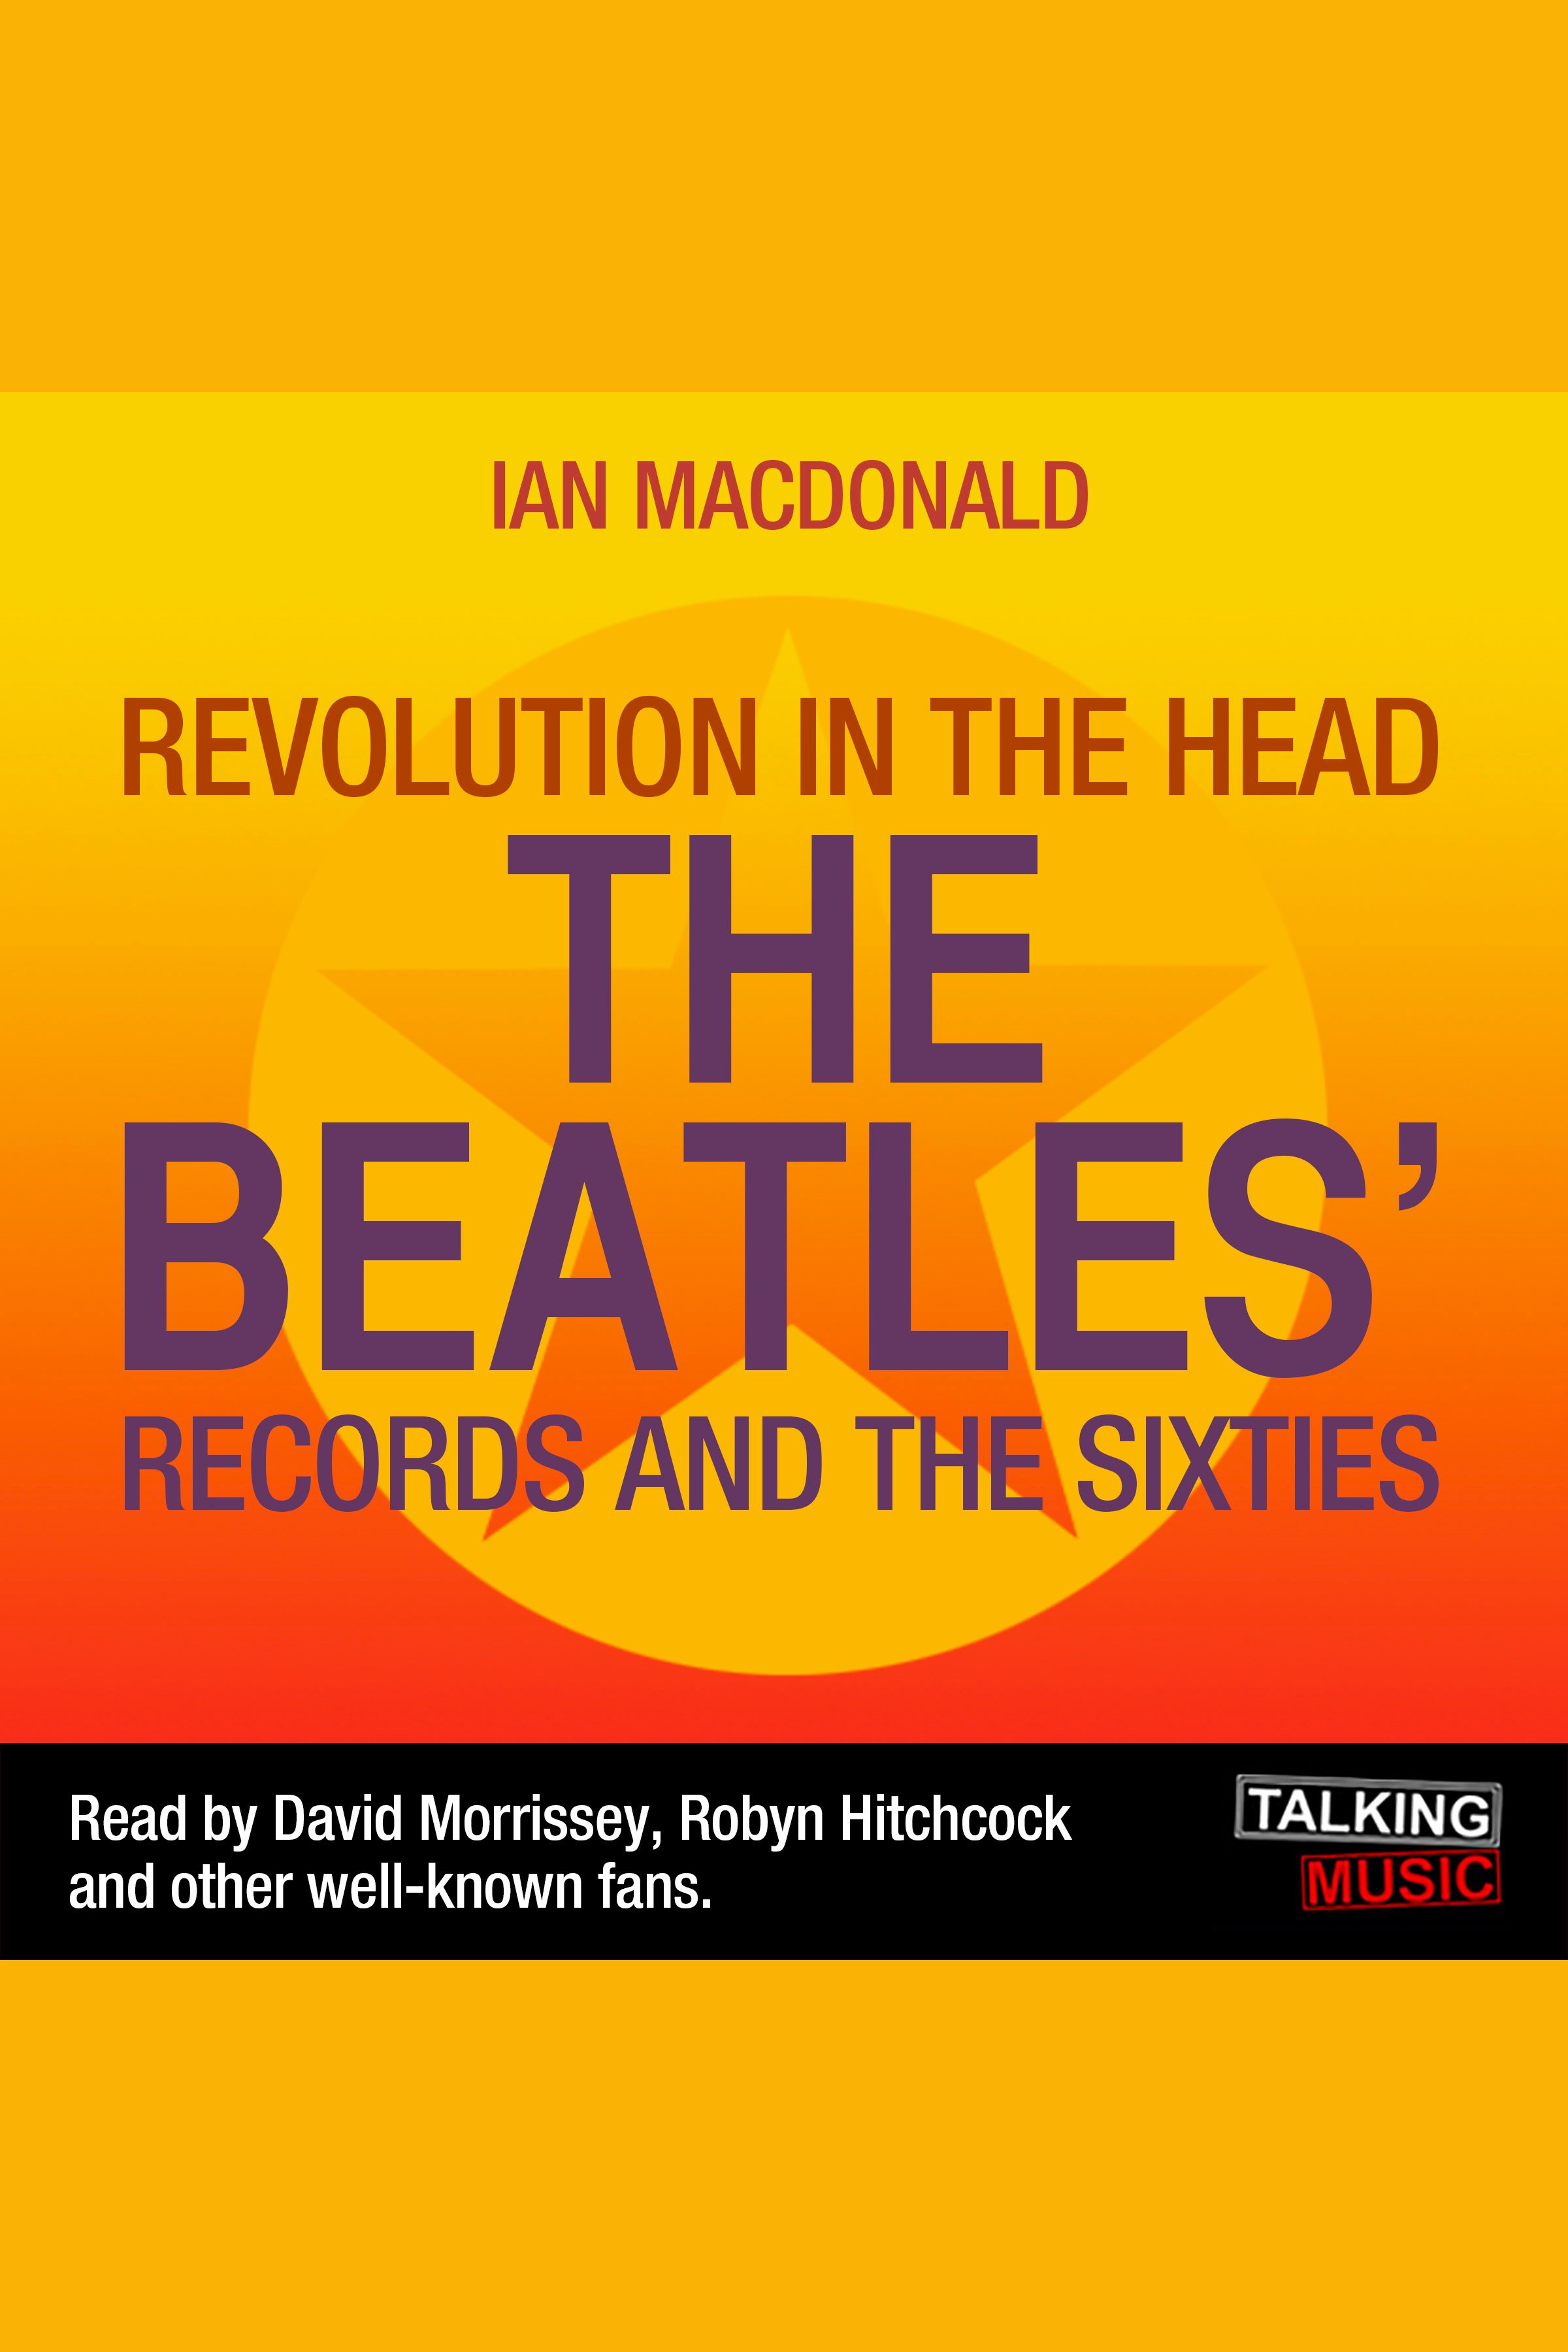 Revolution In The Head The Beatles' Records and The Sixties cover image